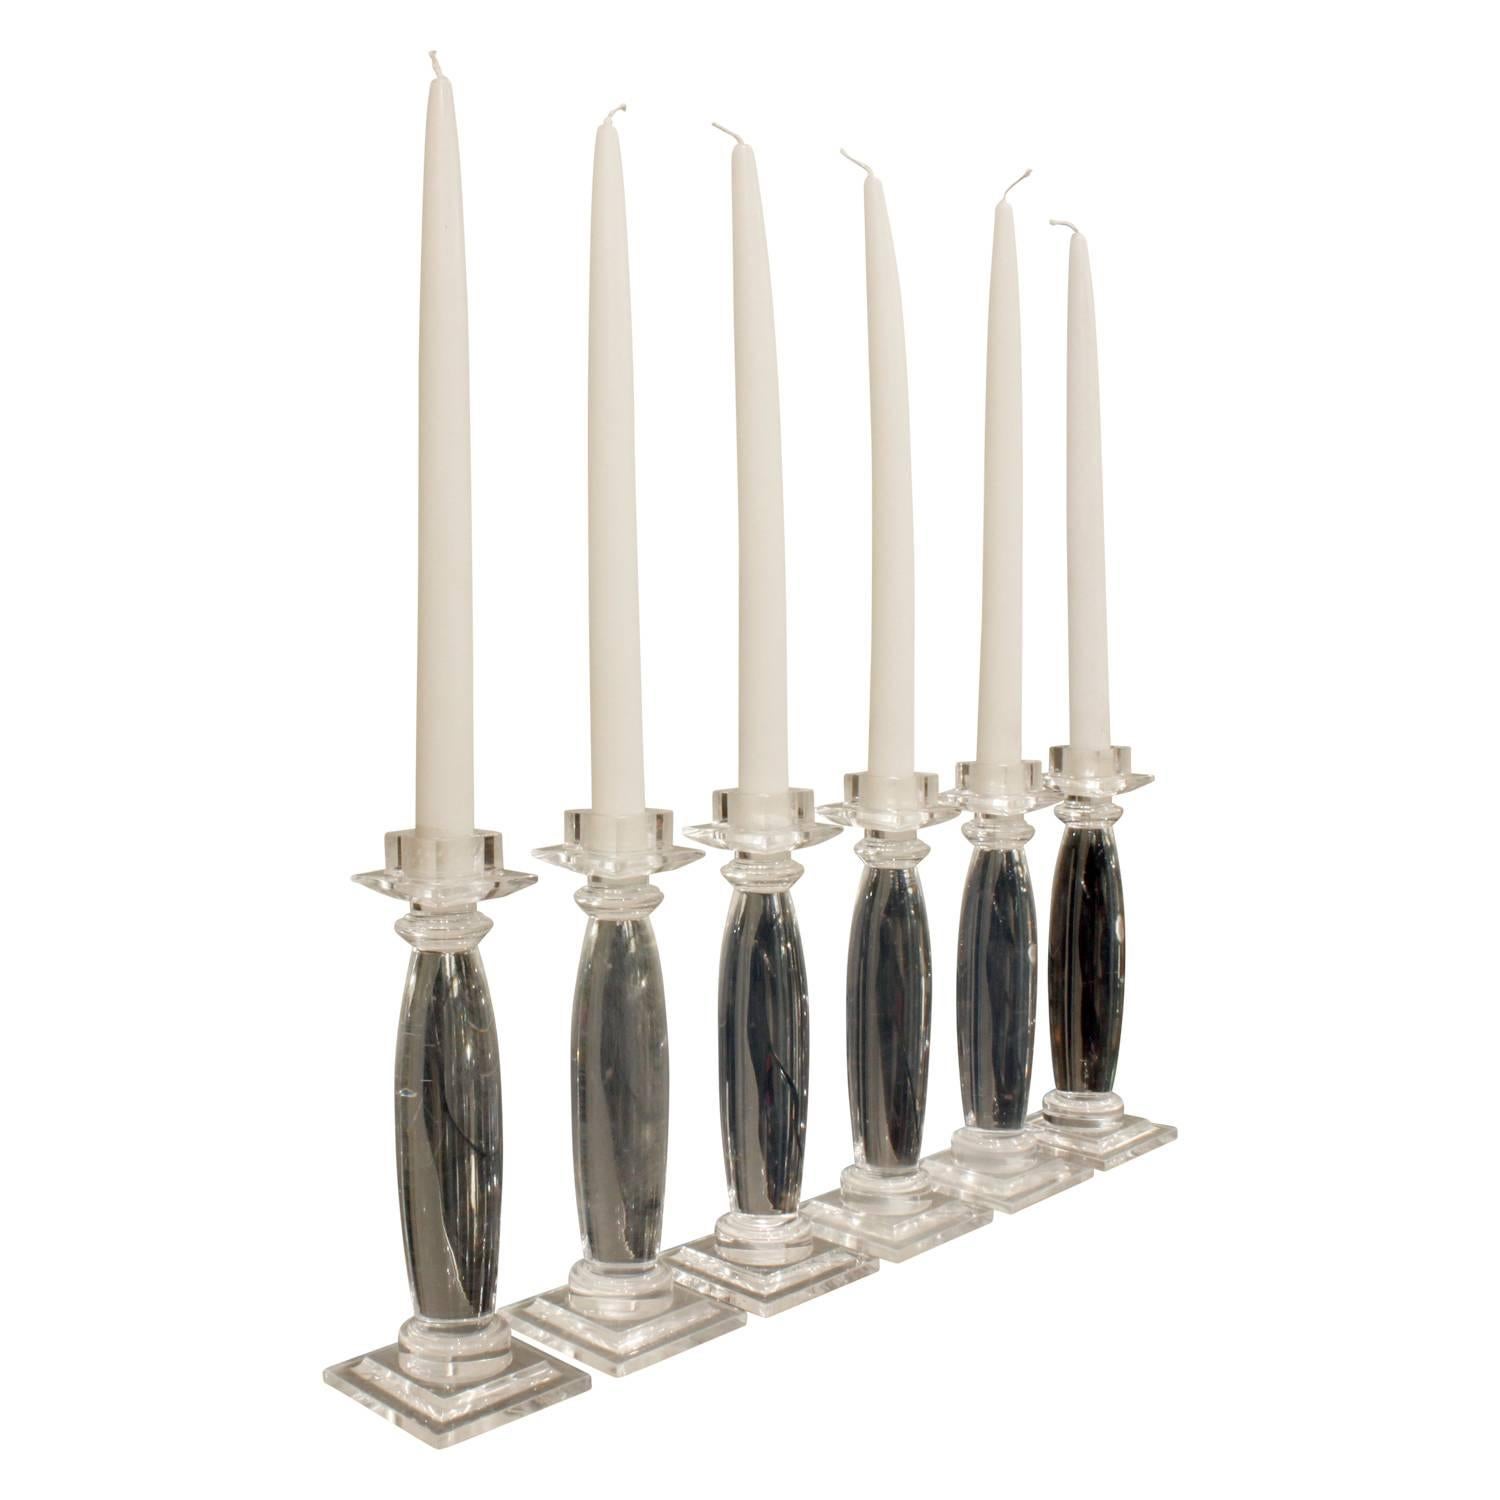 Set of six “Greek column candle holders” in solid Lucite by Karl Springer, American, 1981.